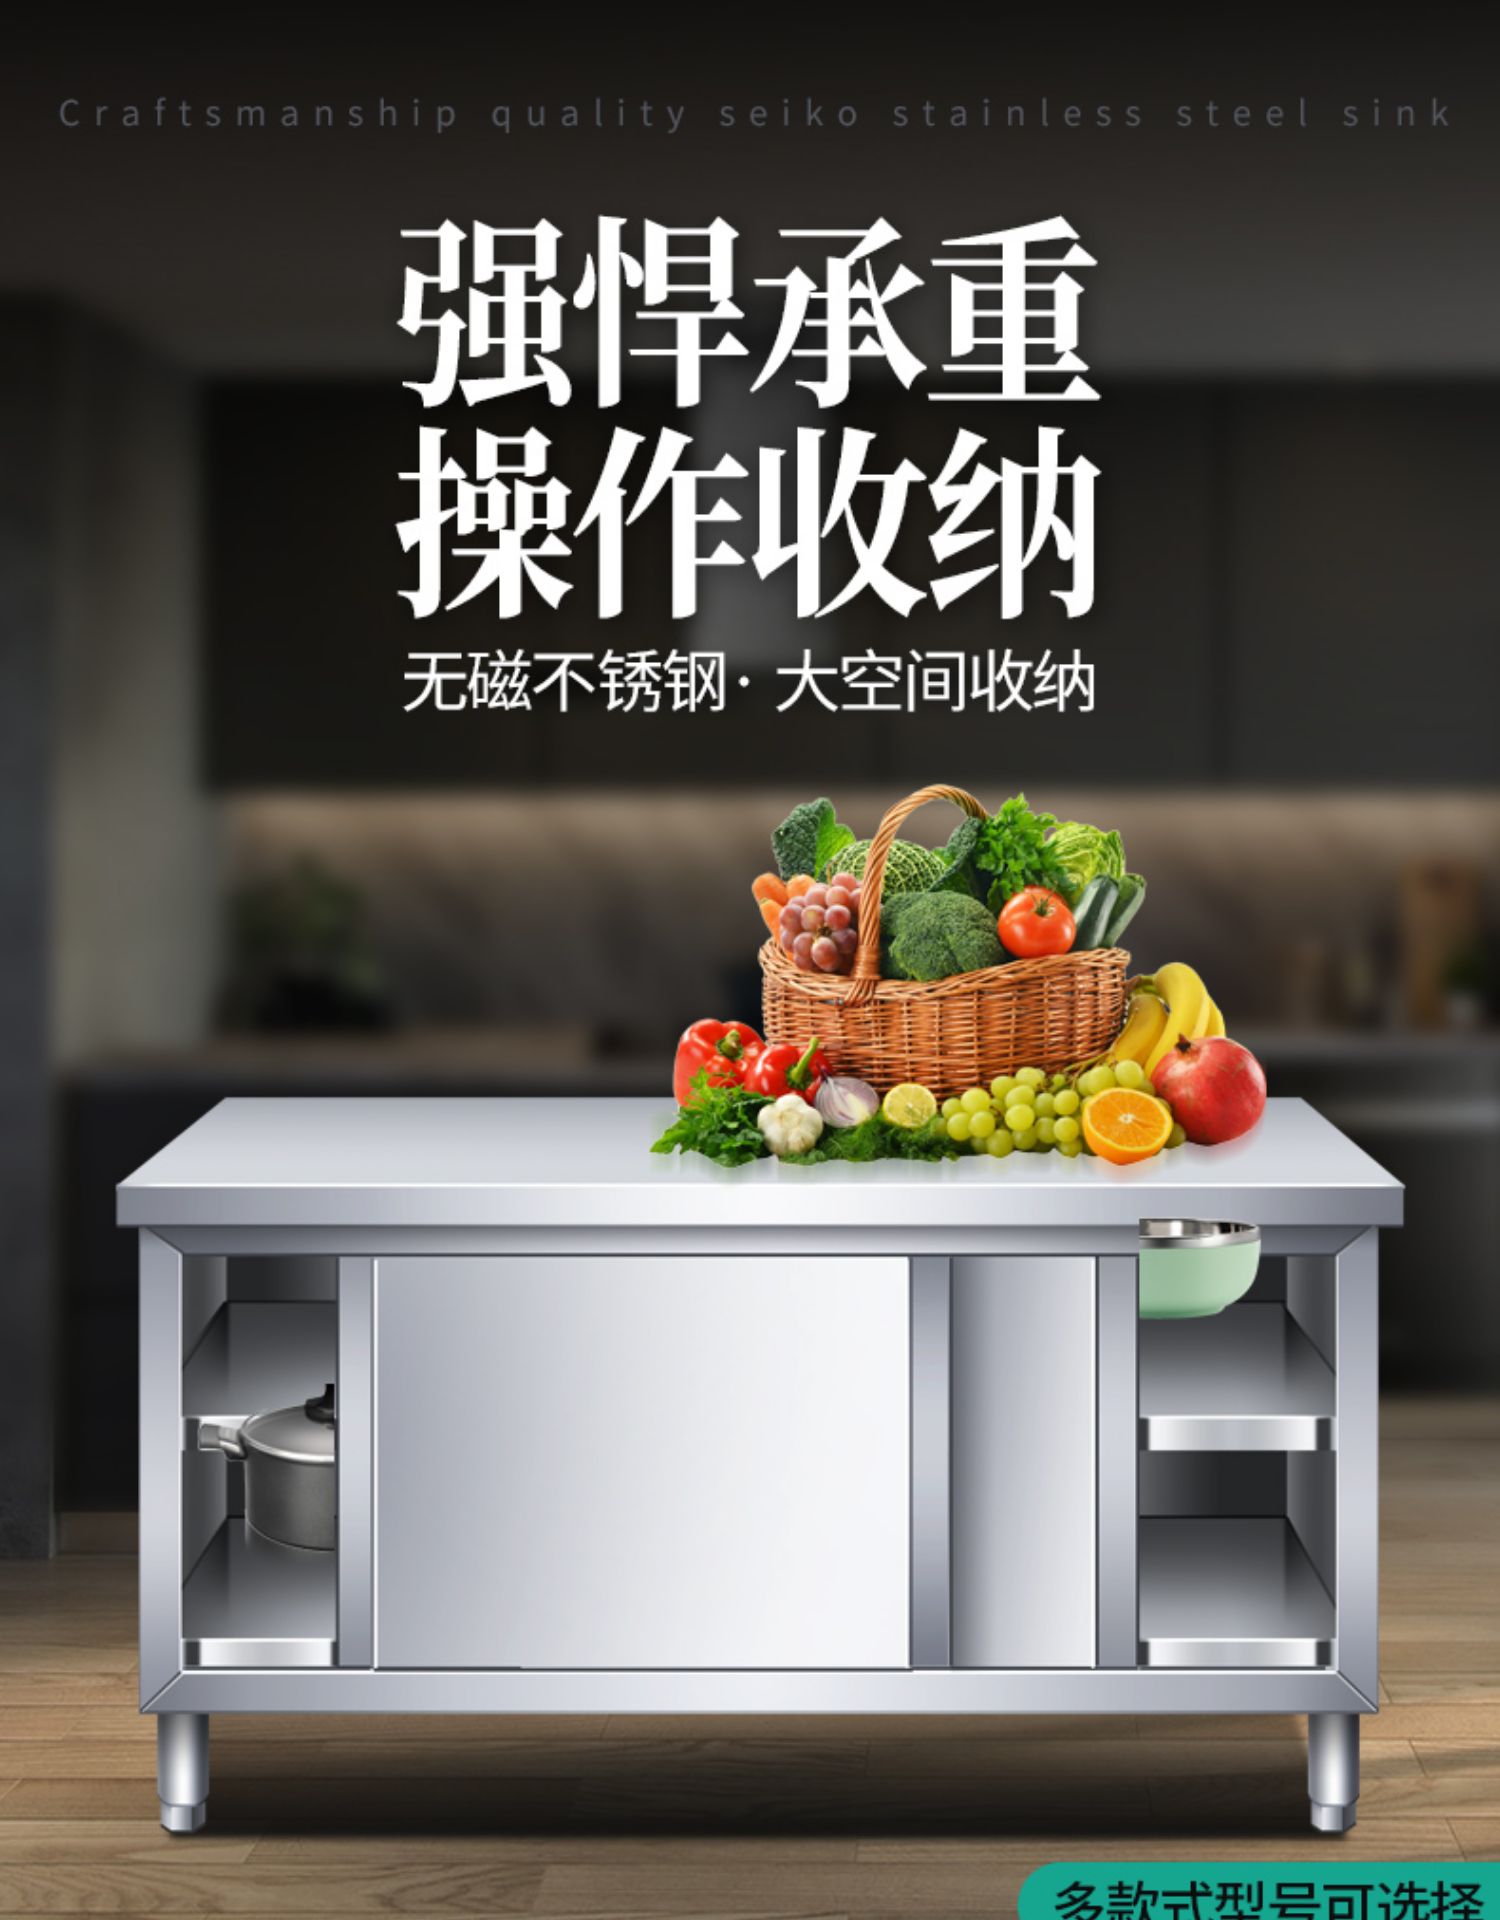 Bowl style commercial kitchen thickened sliding door workbench stainless steel countertop kitchen cabinet storage cabinet push pull loading operation table